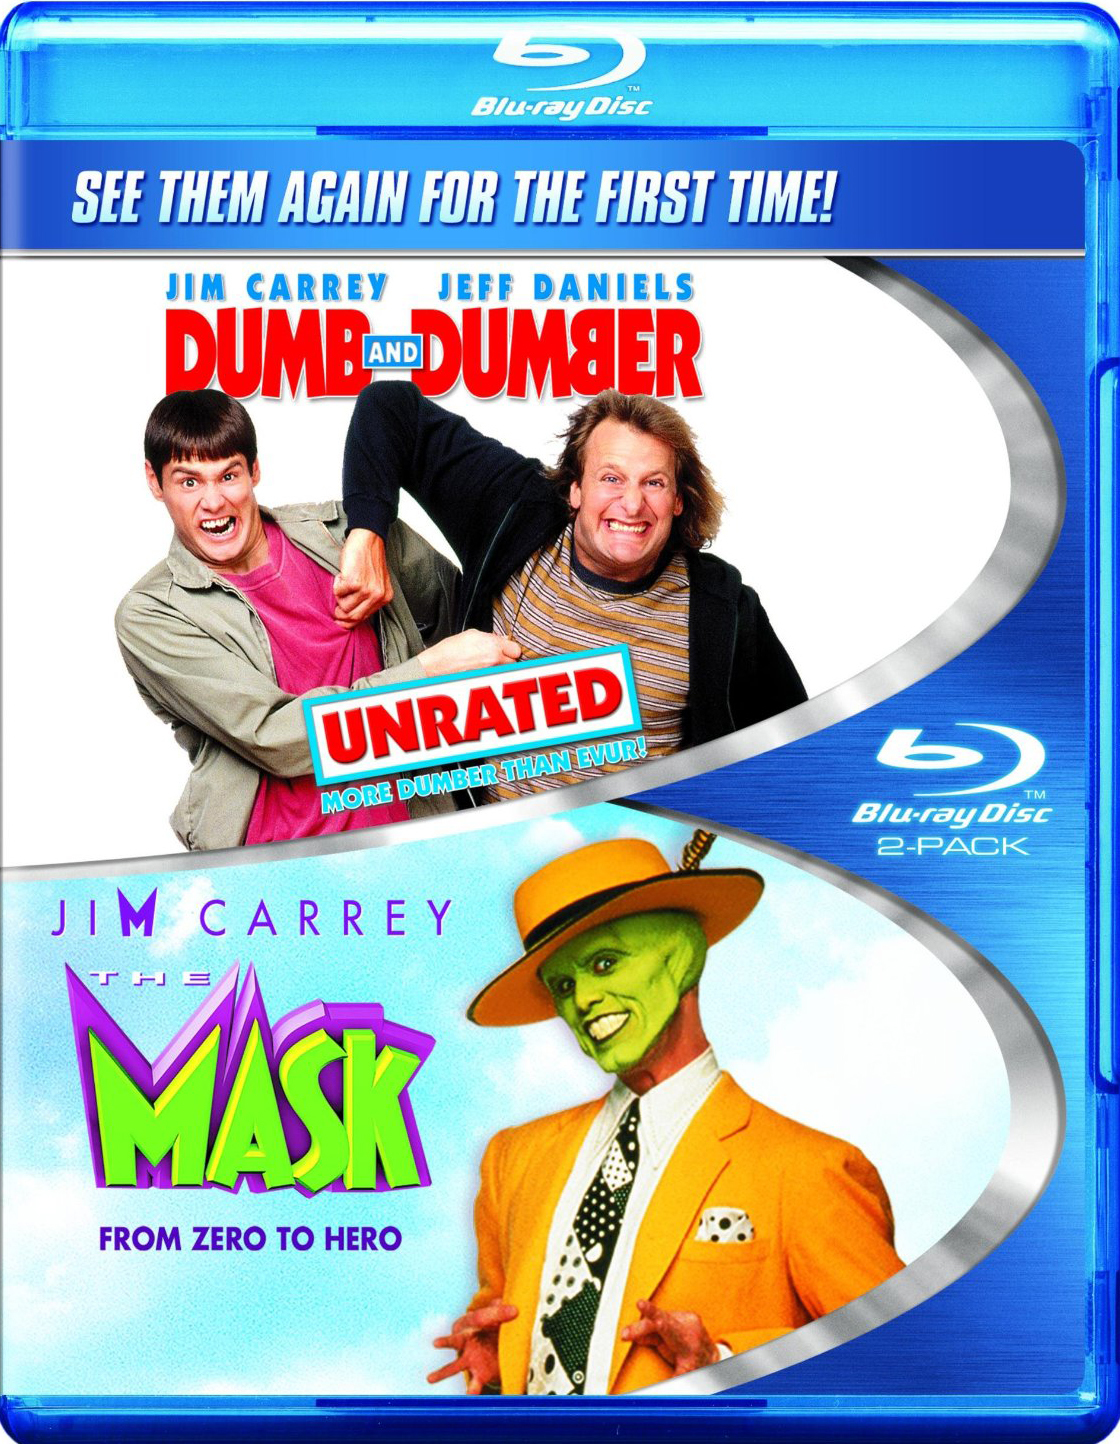 Dumb and Dumber & The Mask